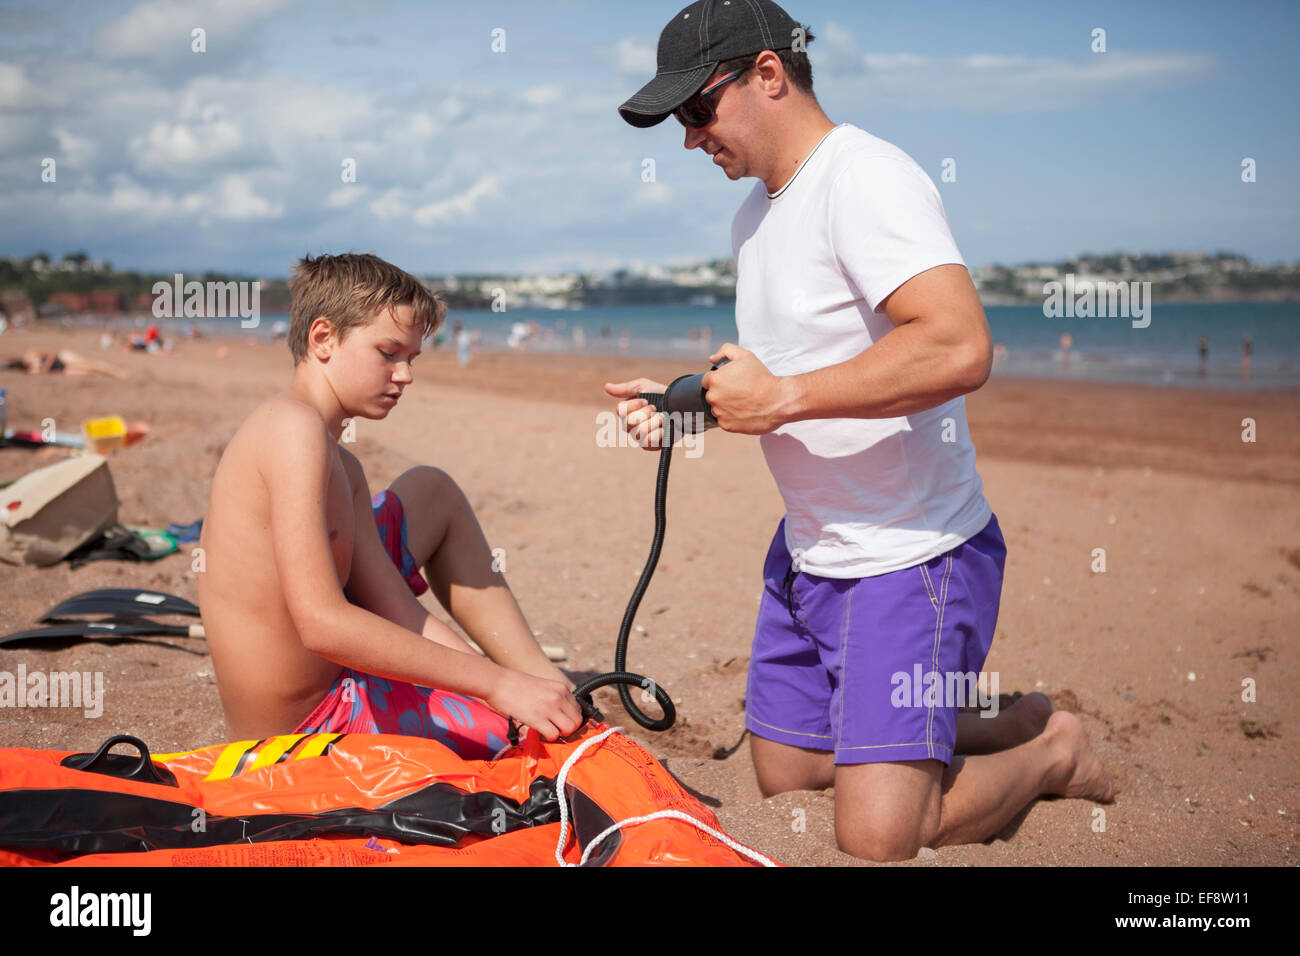 Father and son (12-13) inflating boat on beach Stock Photo